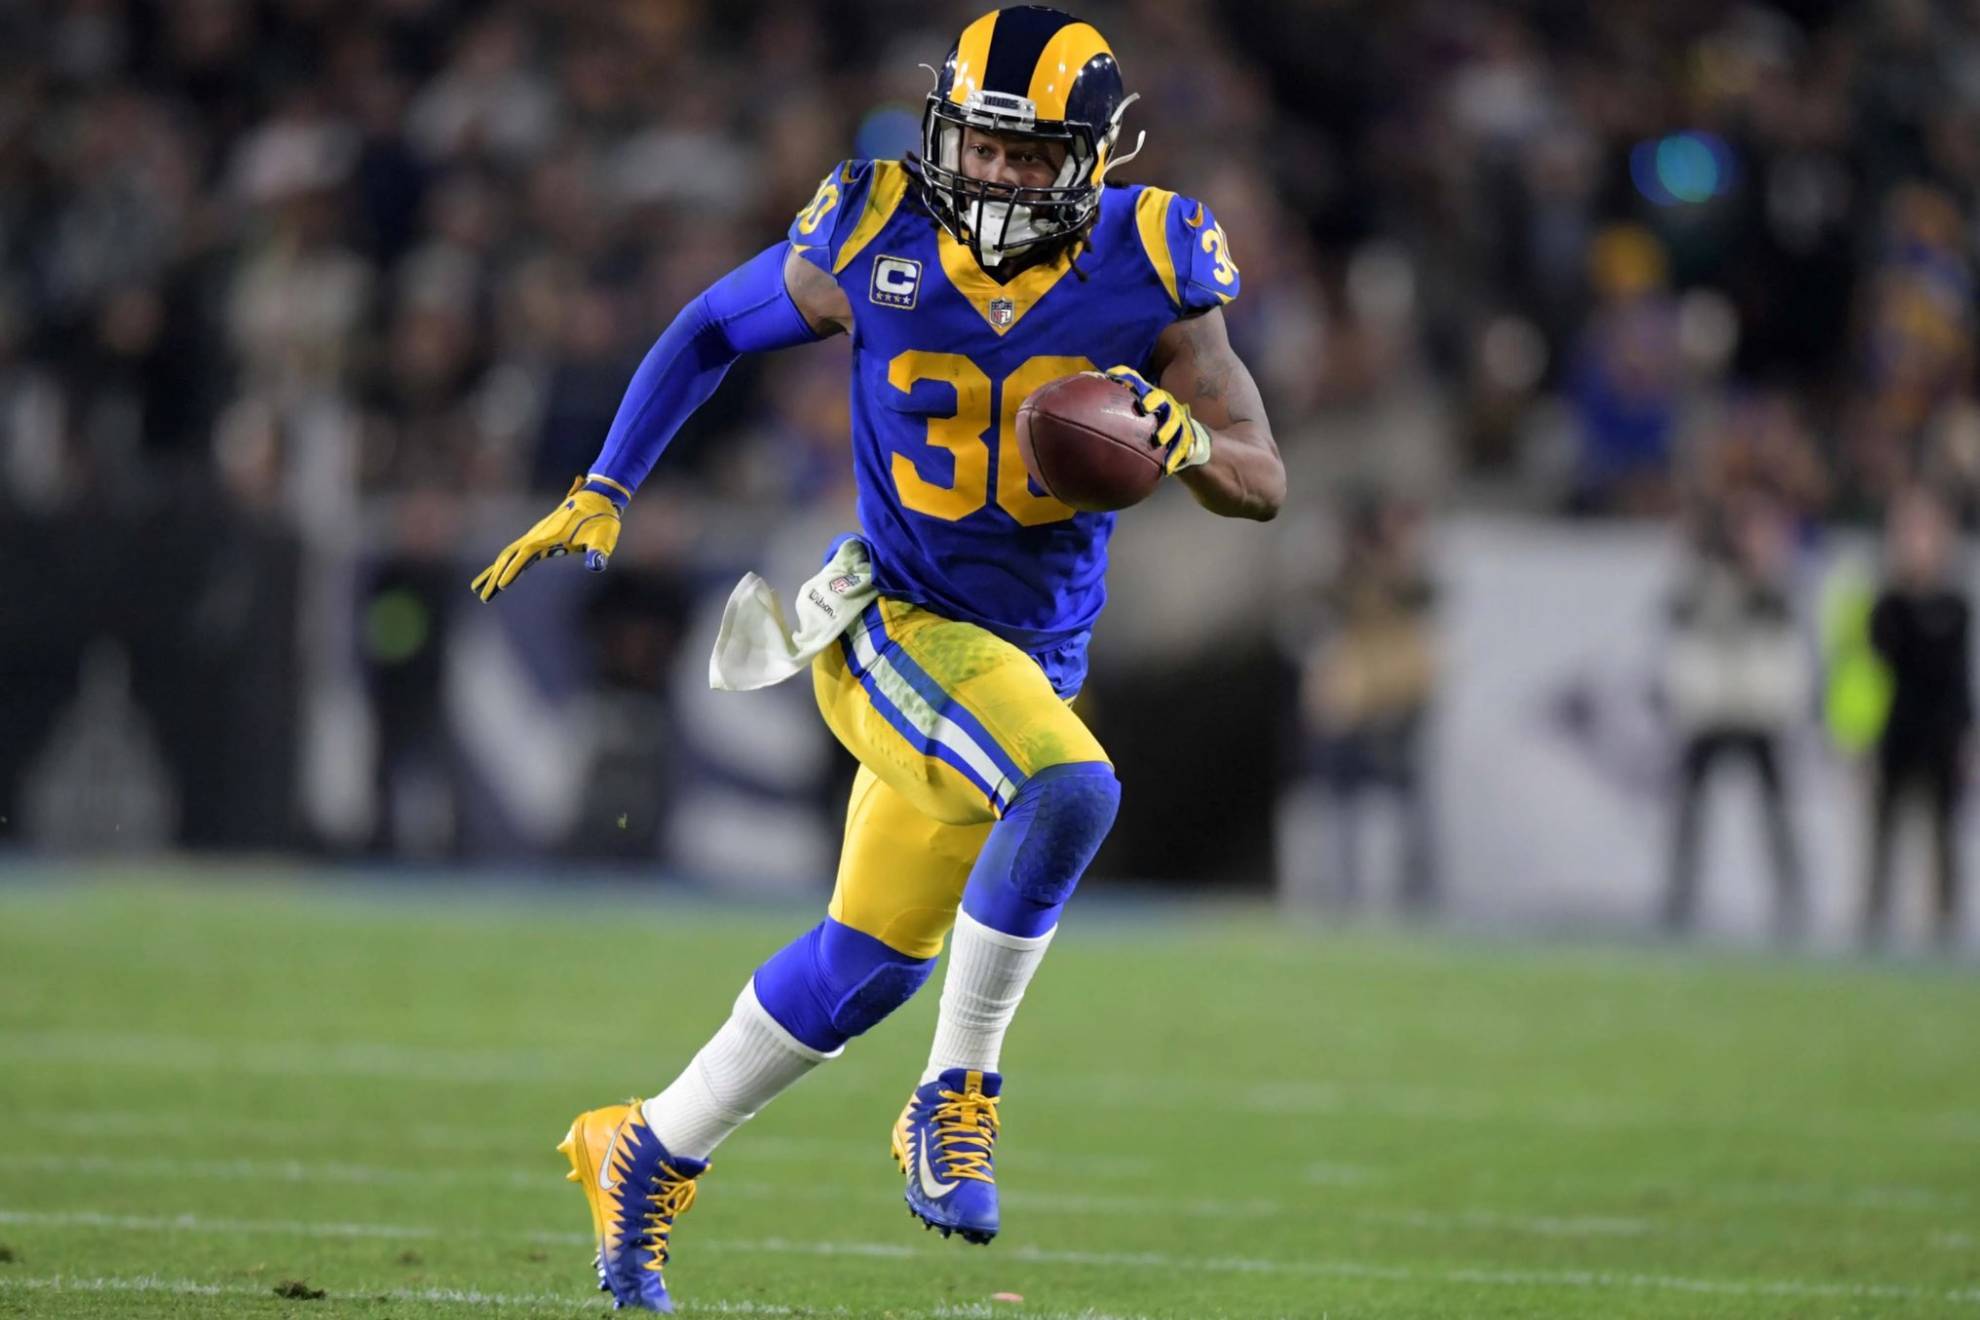 NFL: The running back Todd Gurley announces retirement